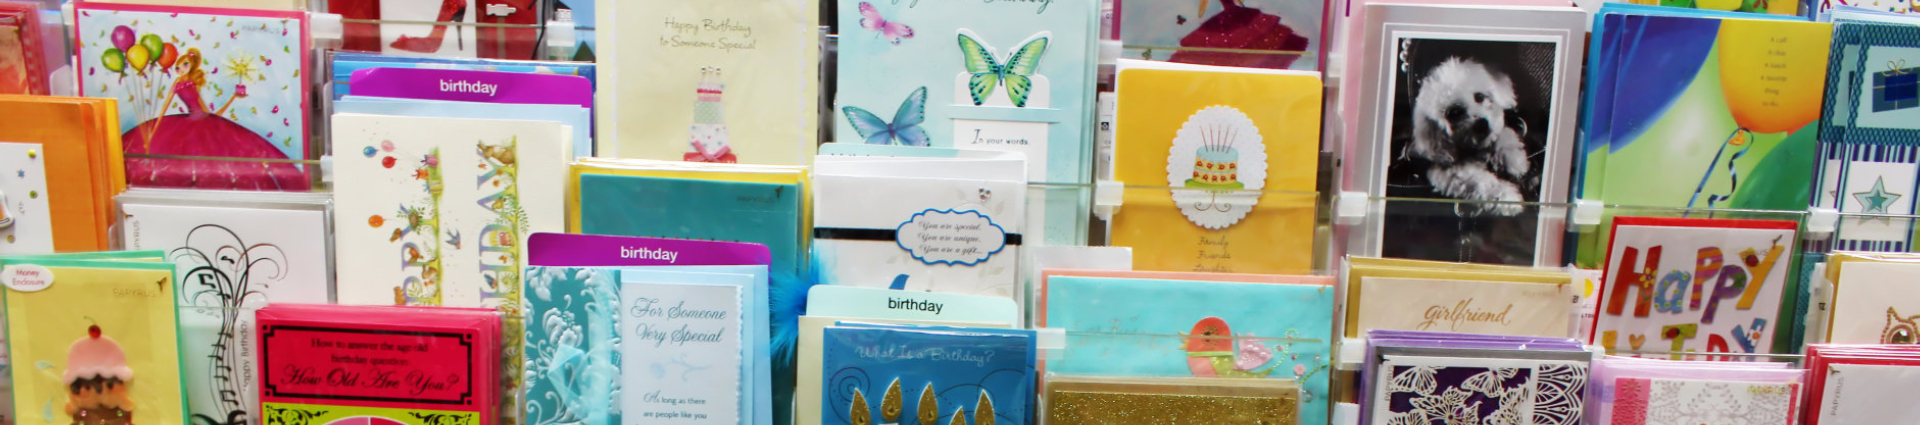 Greeting cards on display